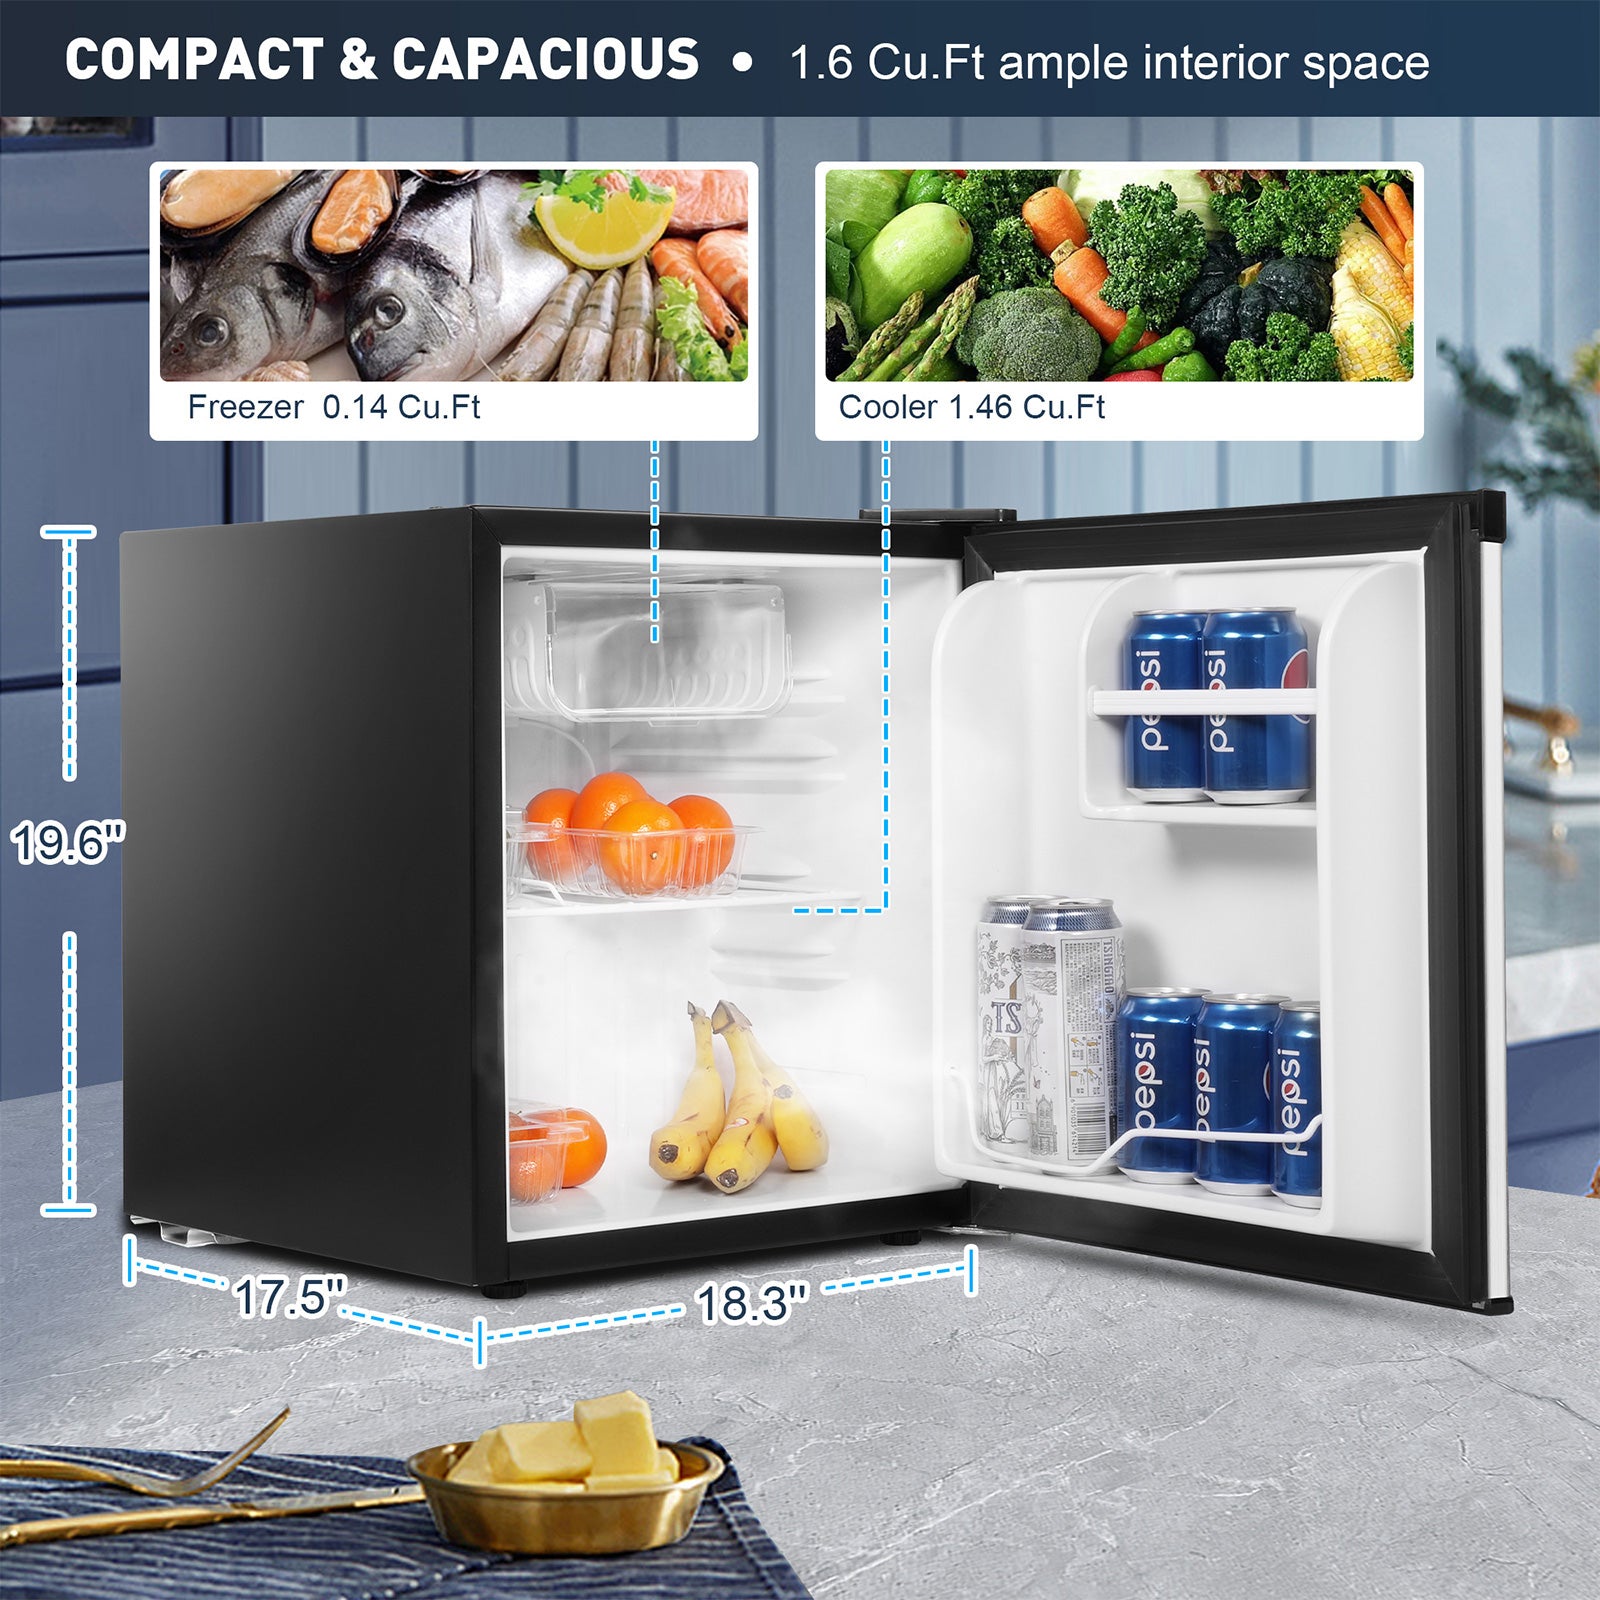 Luckyermore 1.6 Cu.Ft. Mini Fridge with Freezer Compact Refrigerator with Adjustable Thermostat Control